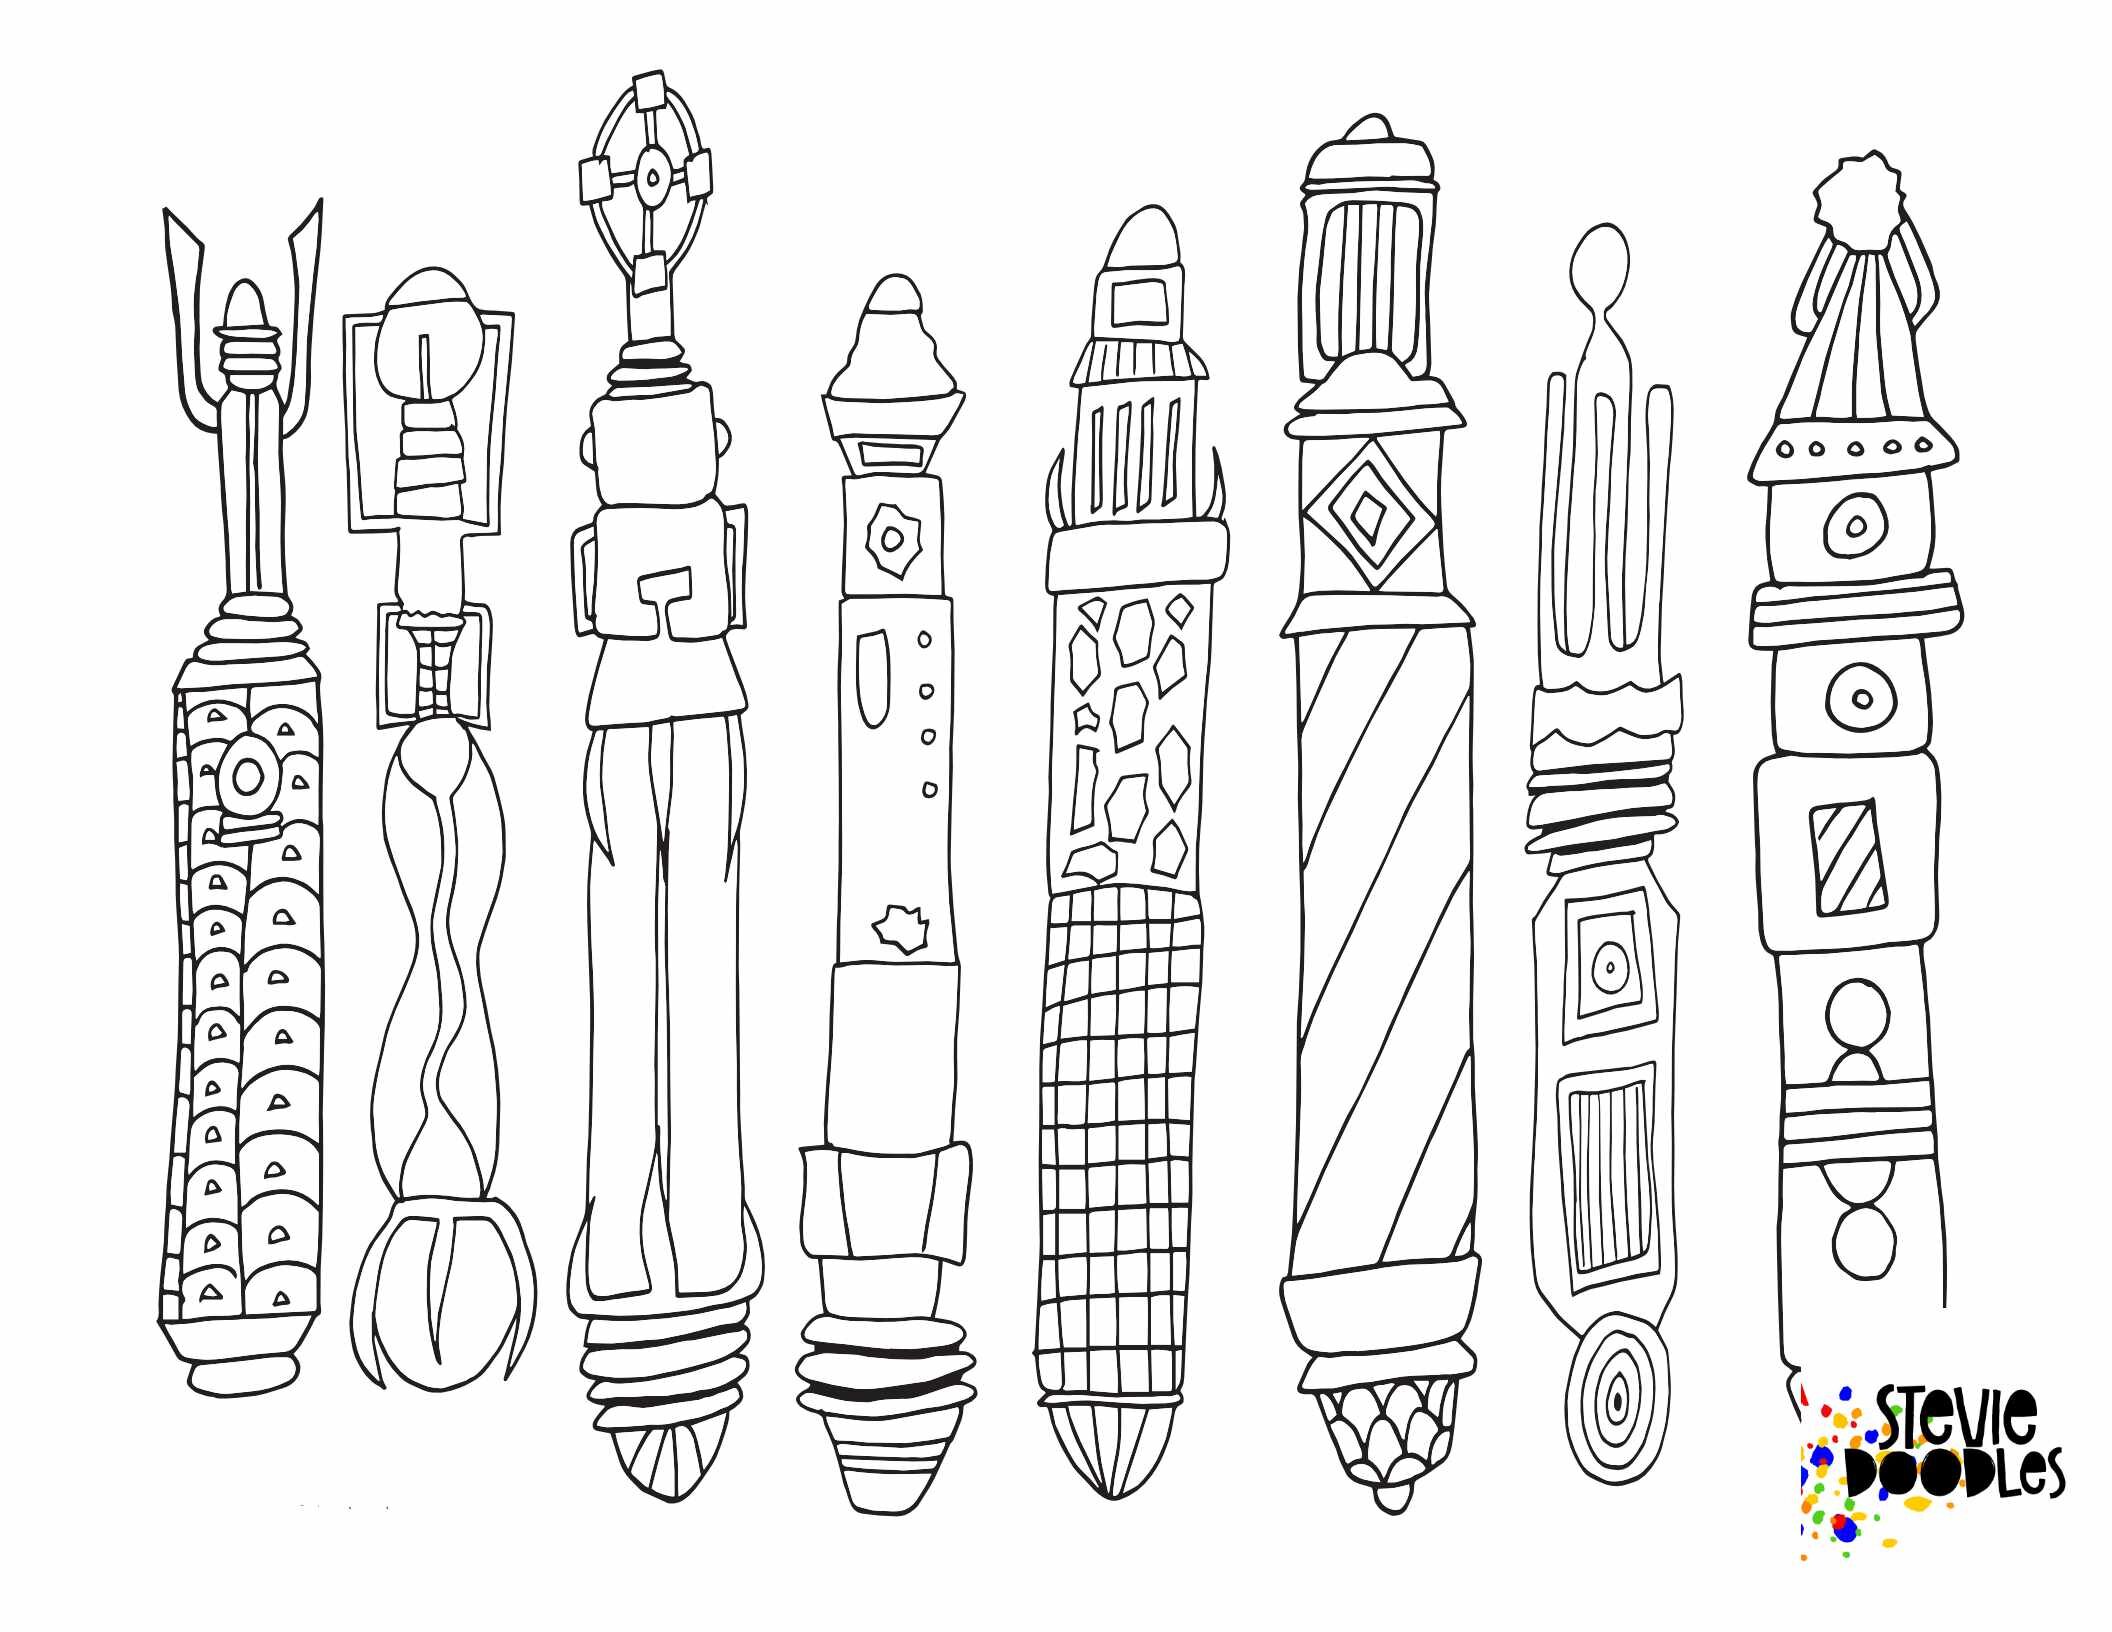 Doctor Who Sonic Screwdrivers - Free Printable Coloring Page Over 1000 free printable coloring pages